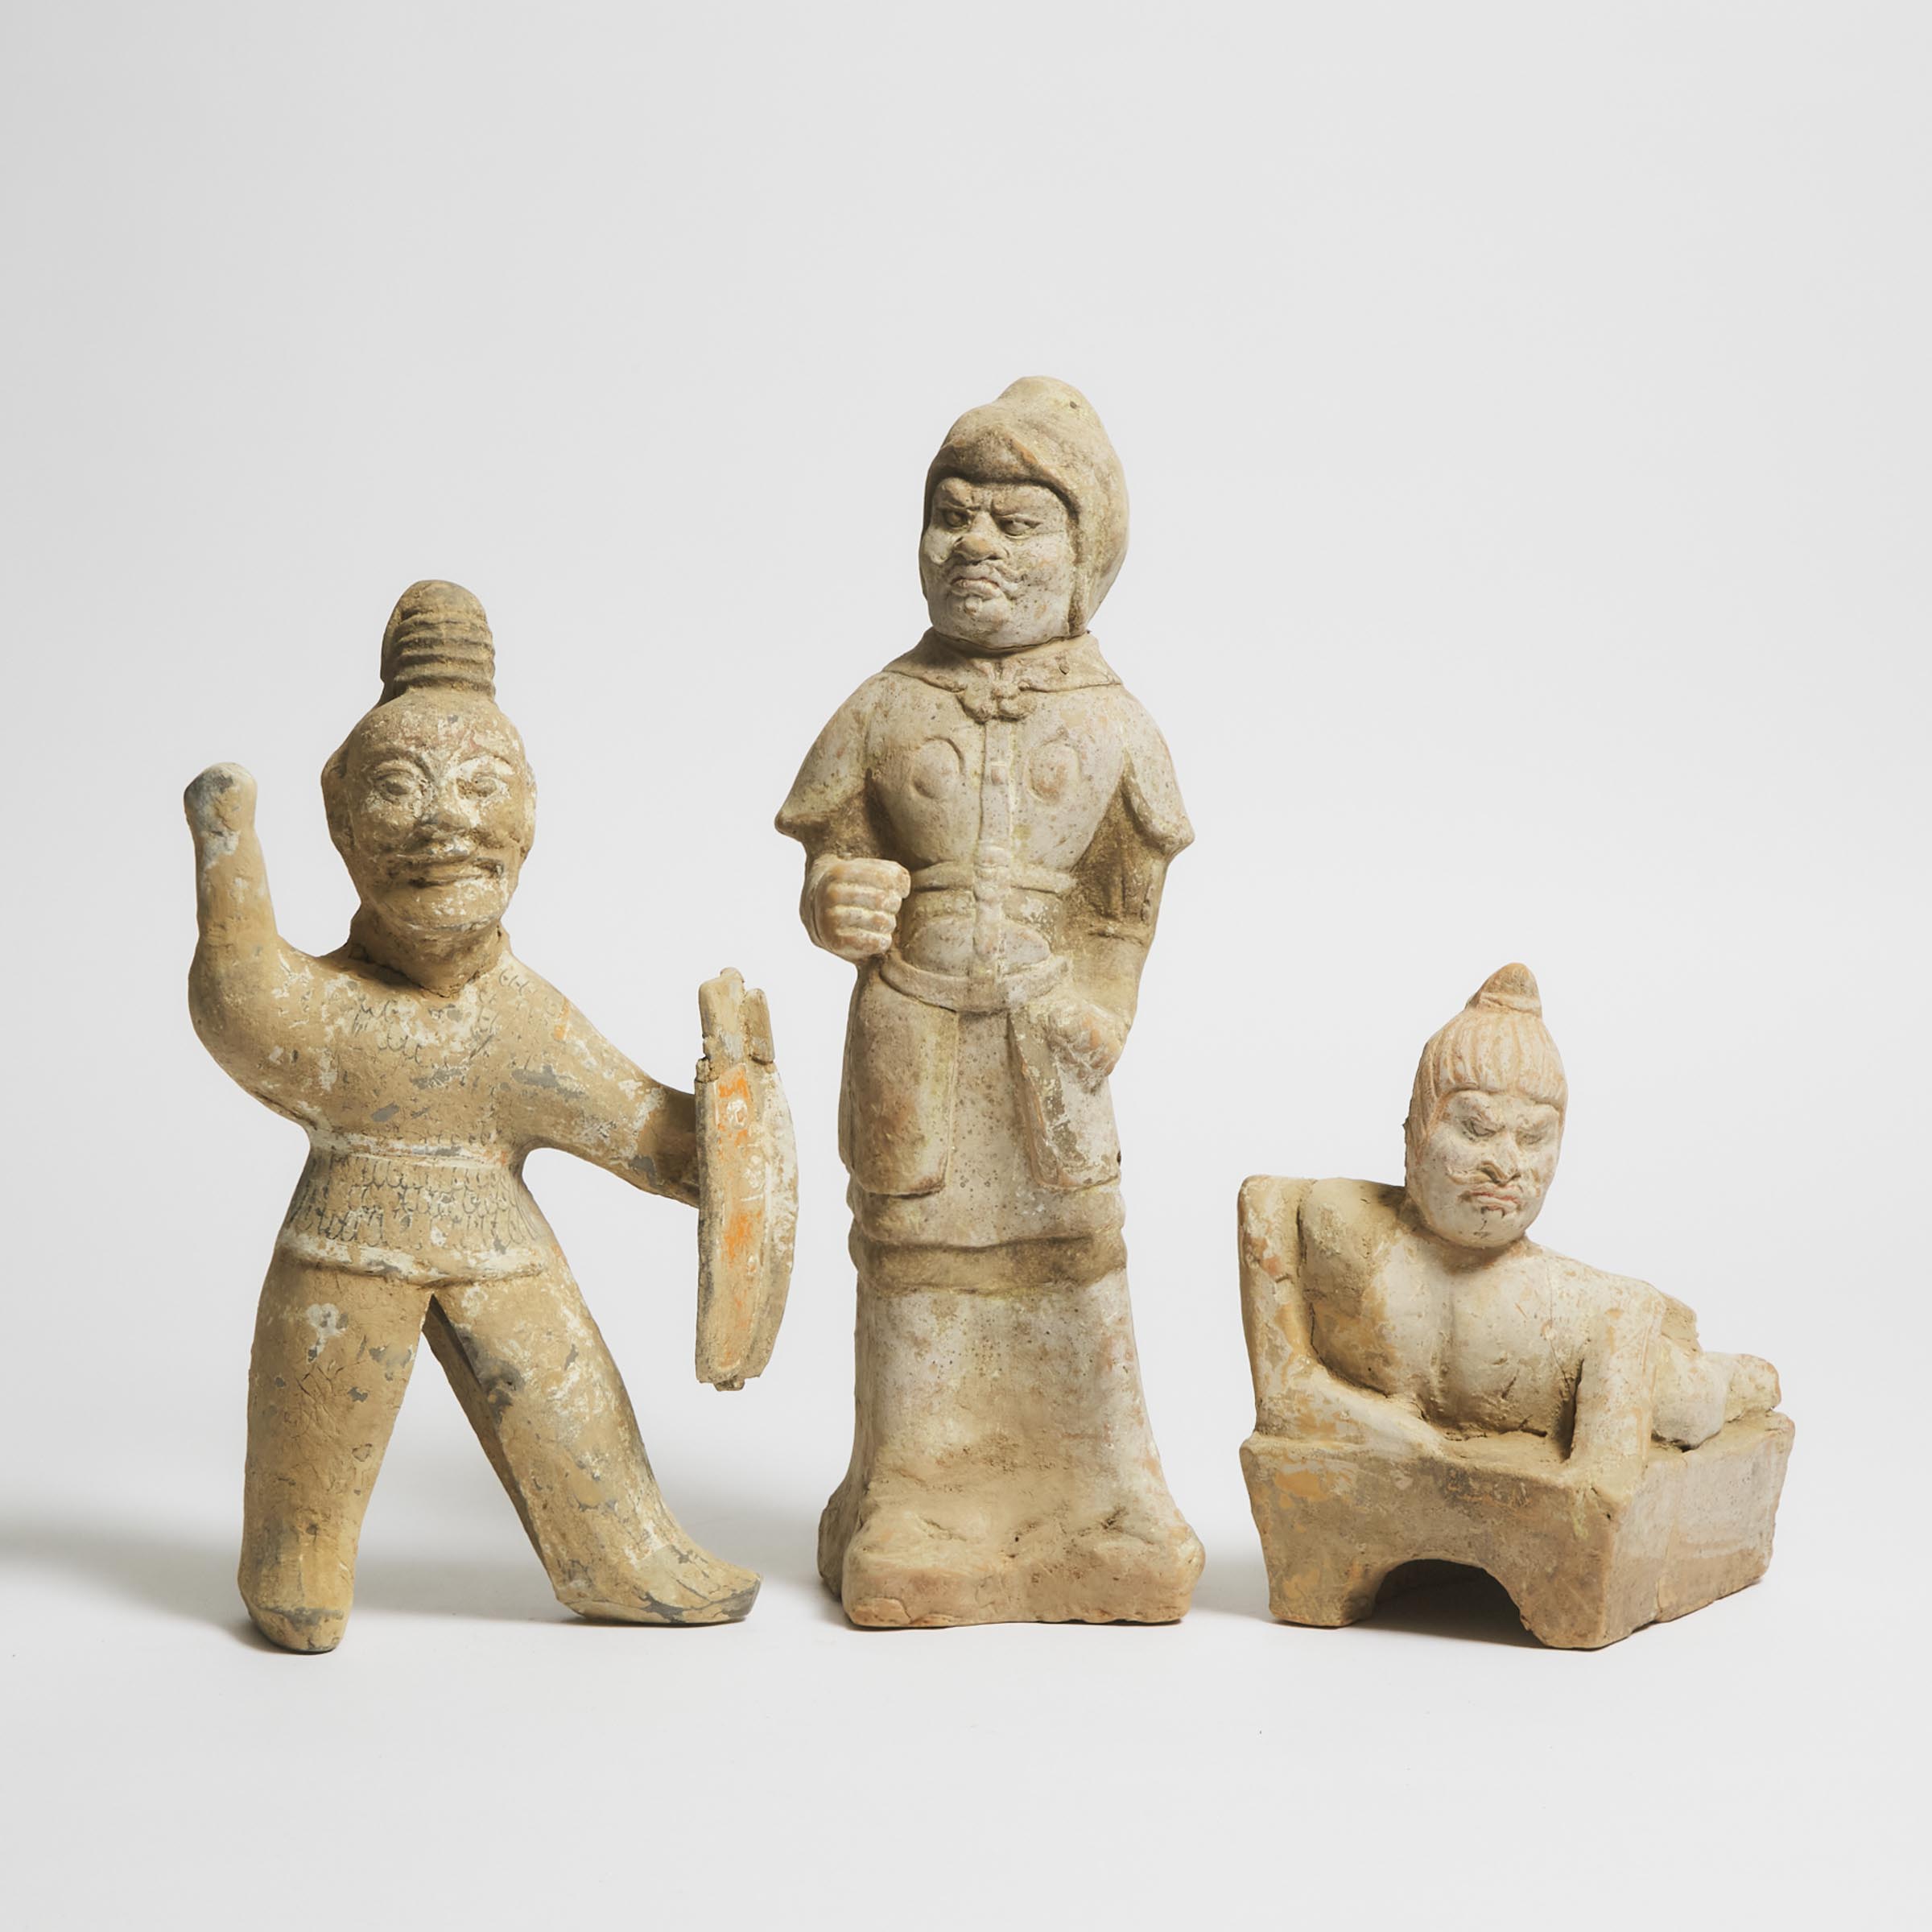 A Group of Three Painted Pottery Figures, Tang Dynasty (AD 618-907)